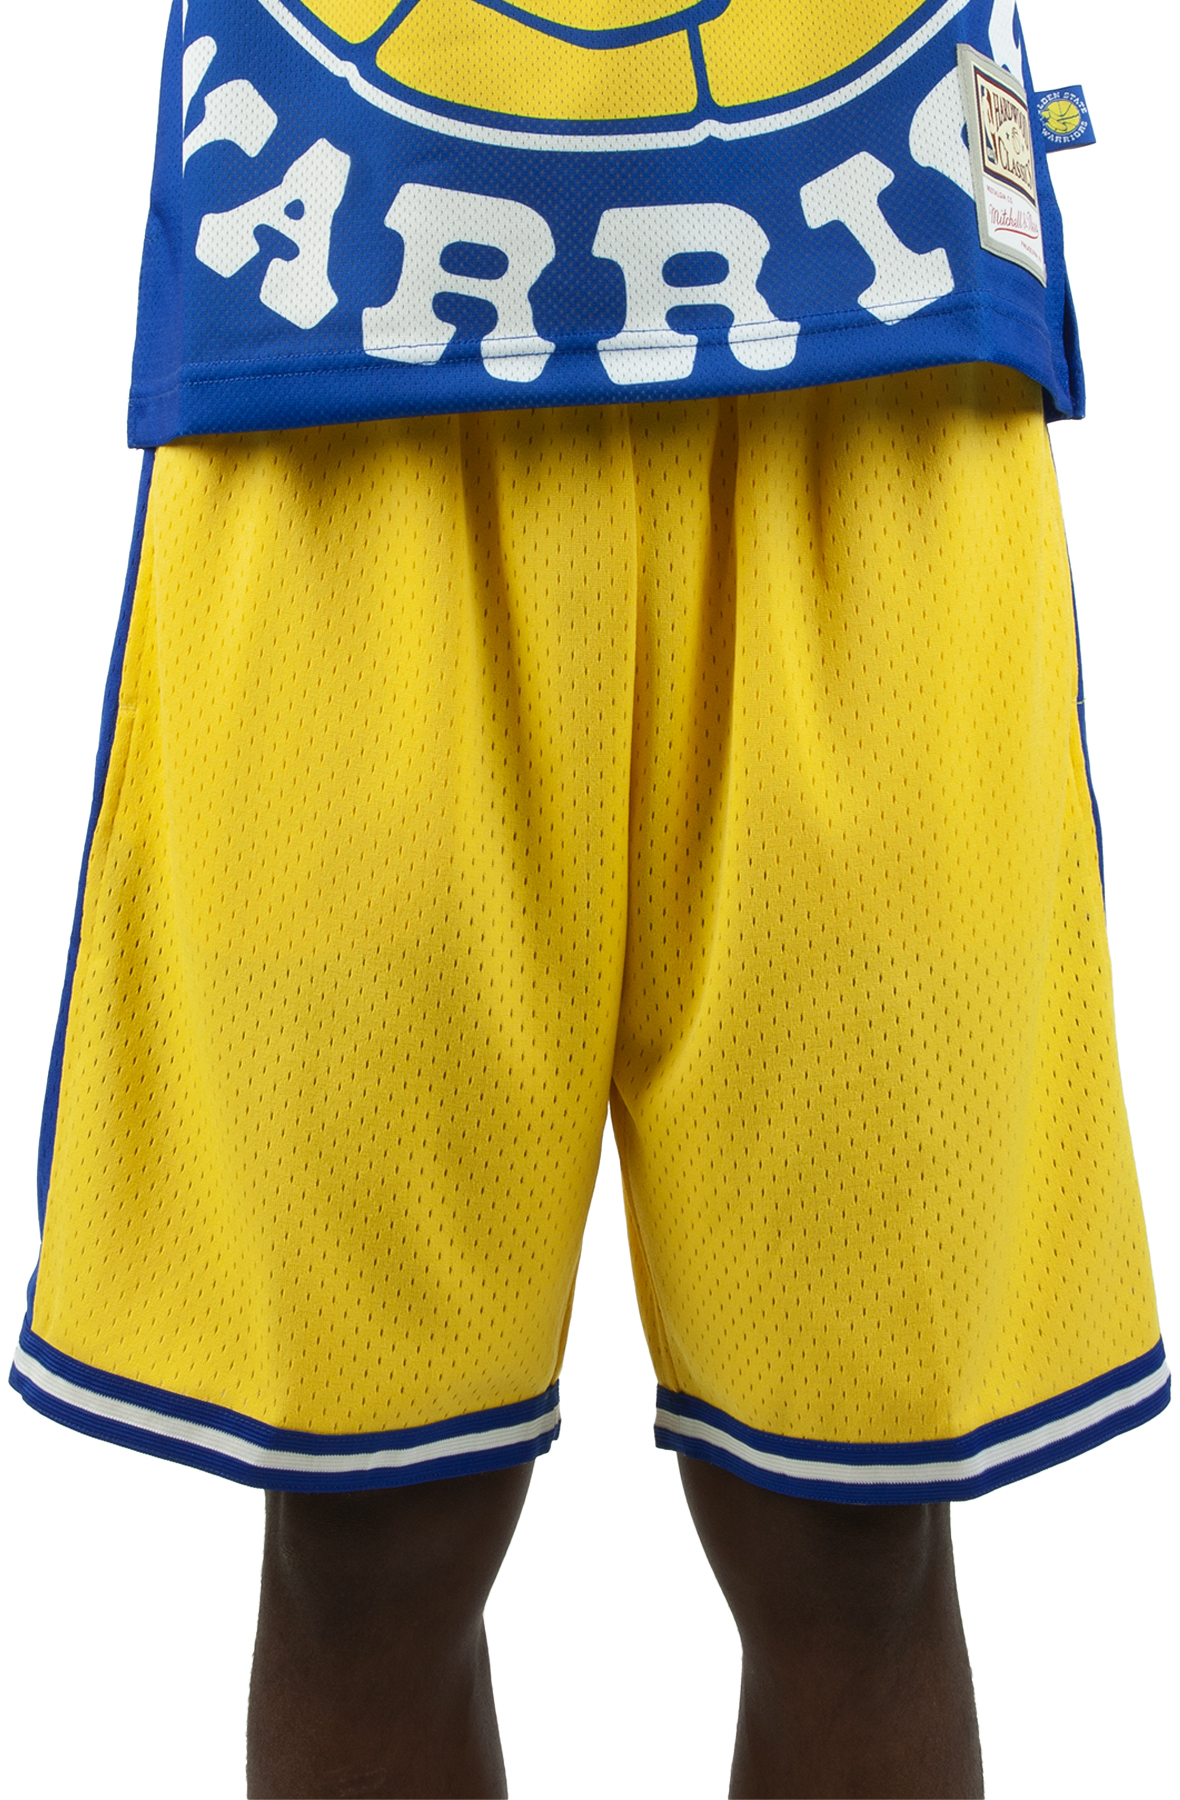 Men's Mitchell & Ness Royal/Gold Golden State Warriors Half and